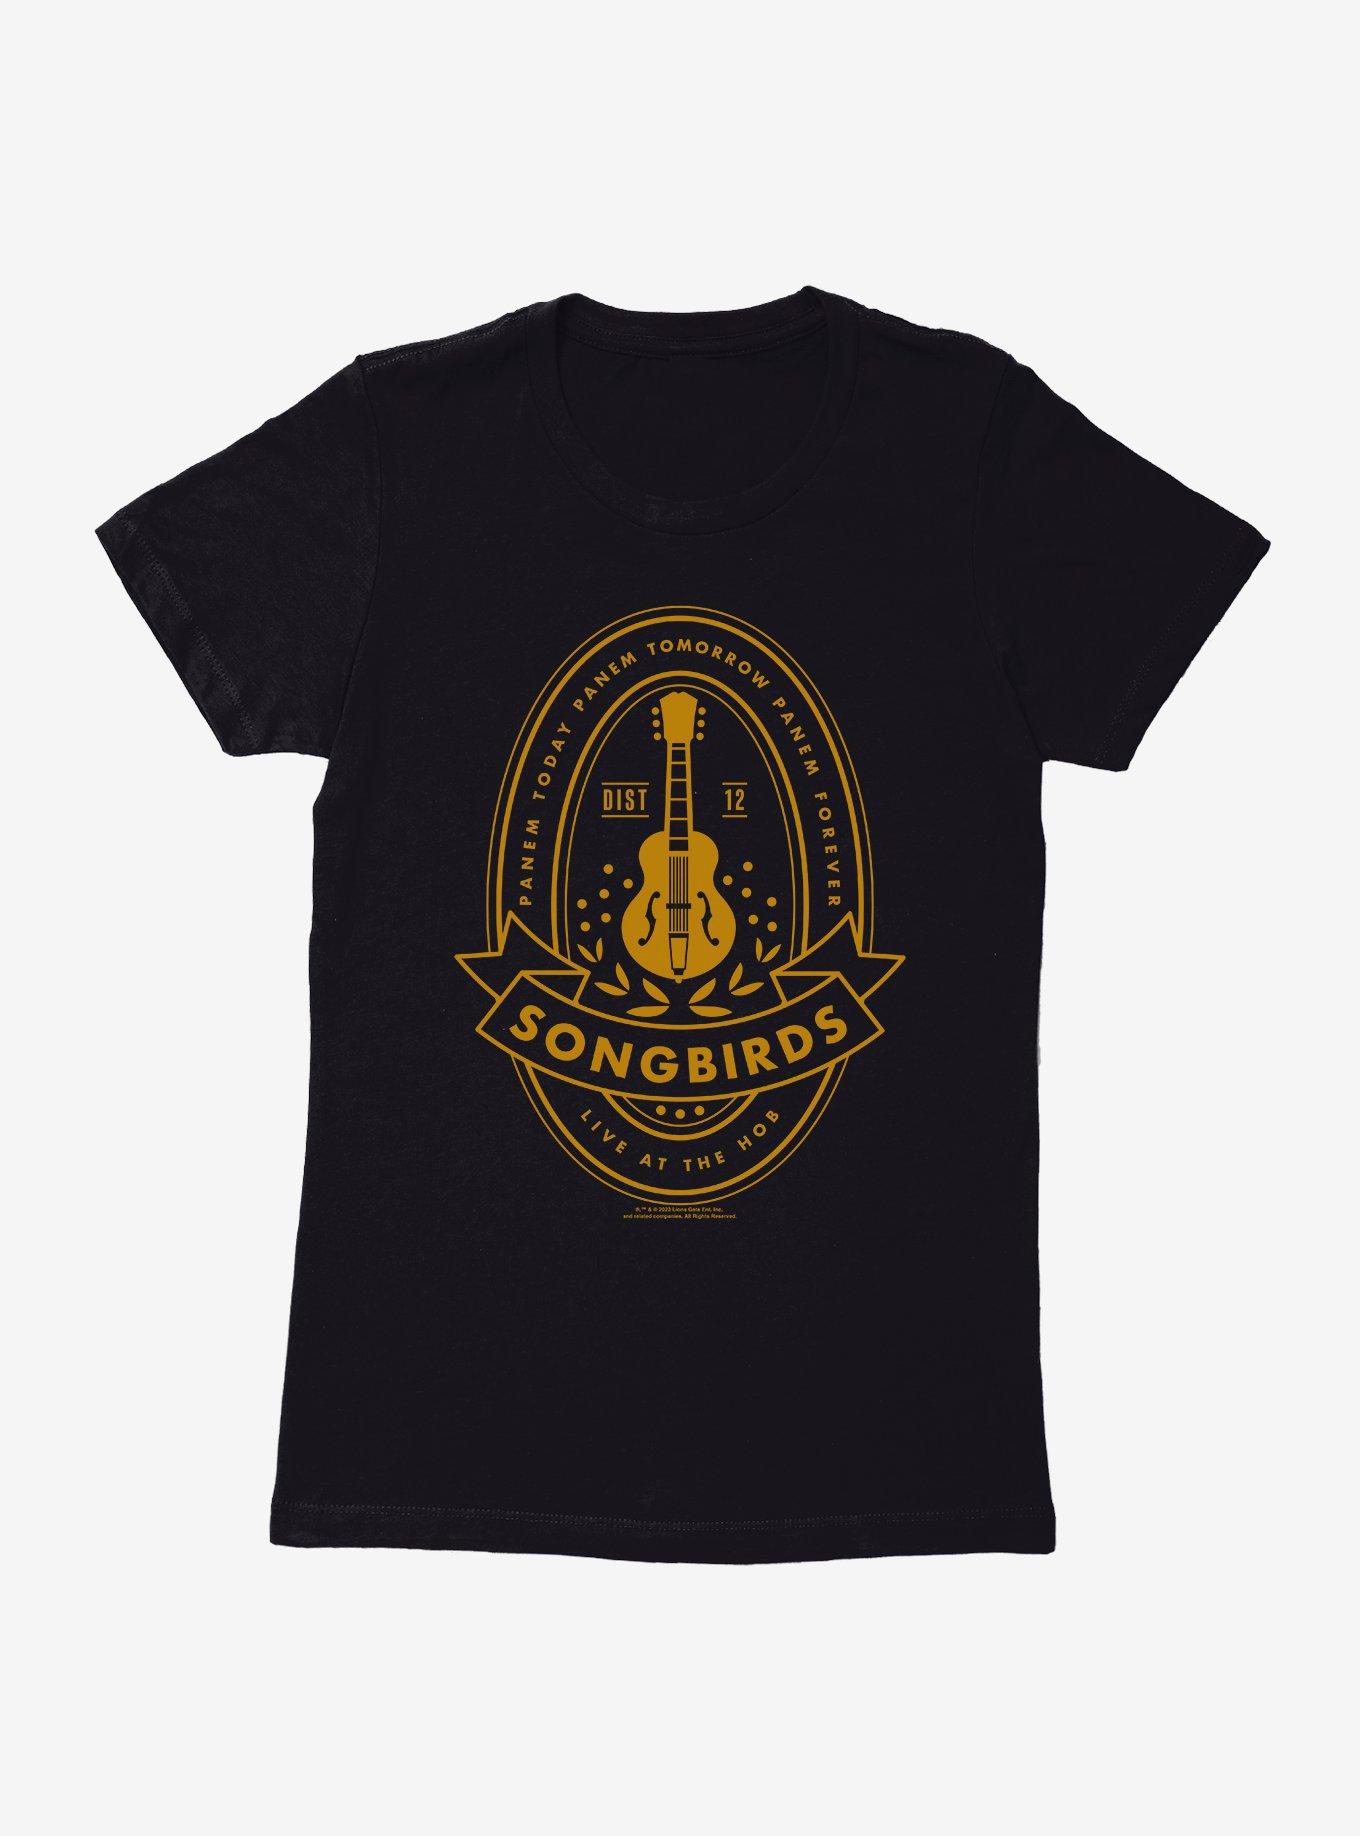 Hunger Games: The Ballad Of Songbirds And Snakes Songbirds Live At The Hob Womens T-Shirt, BLACK, hi-res